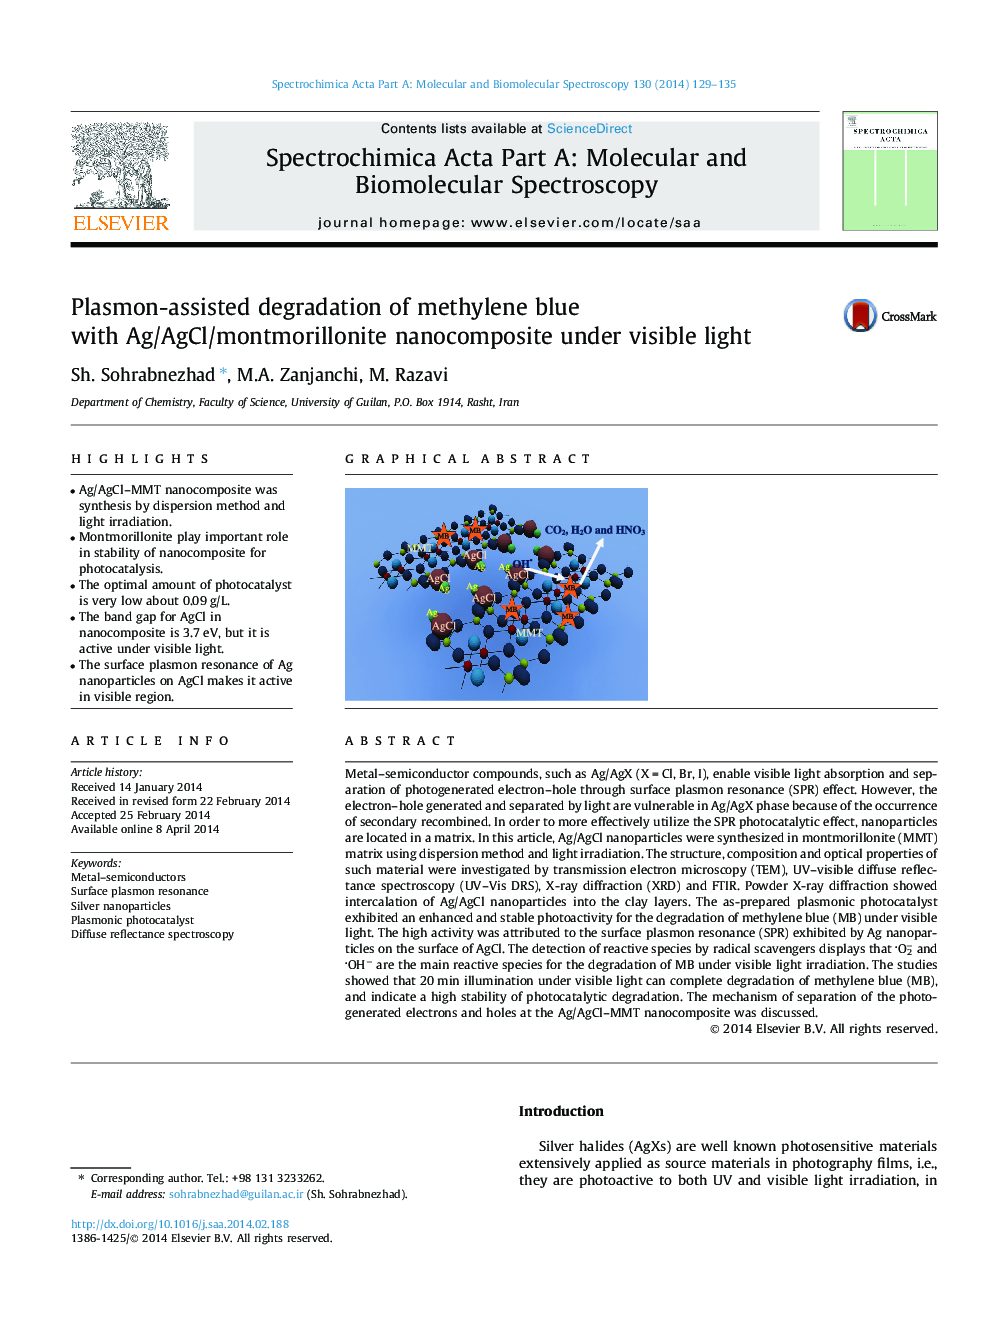 Plasmon-assisted degradation of methylene blue with Ag/AgCl/montmorillonite nanocomposite under visible light